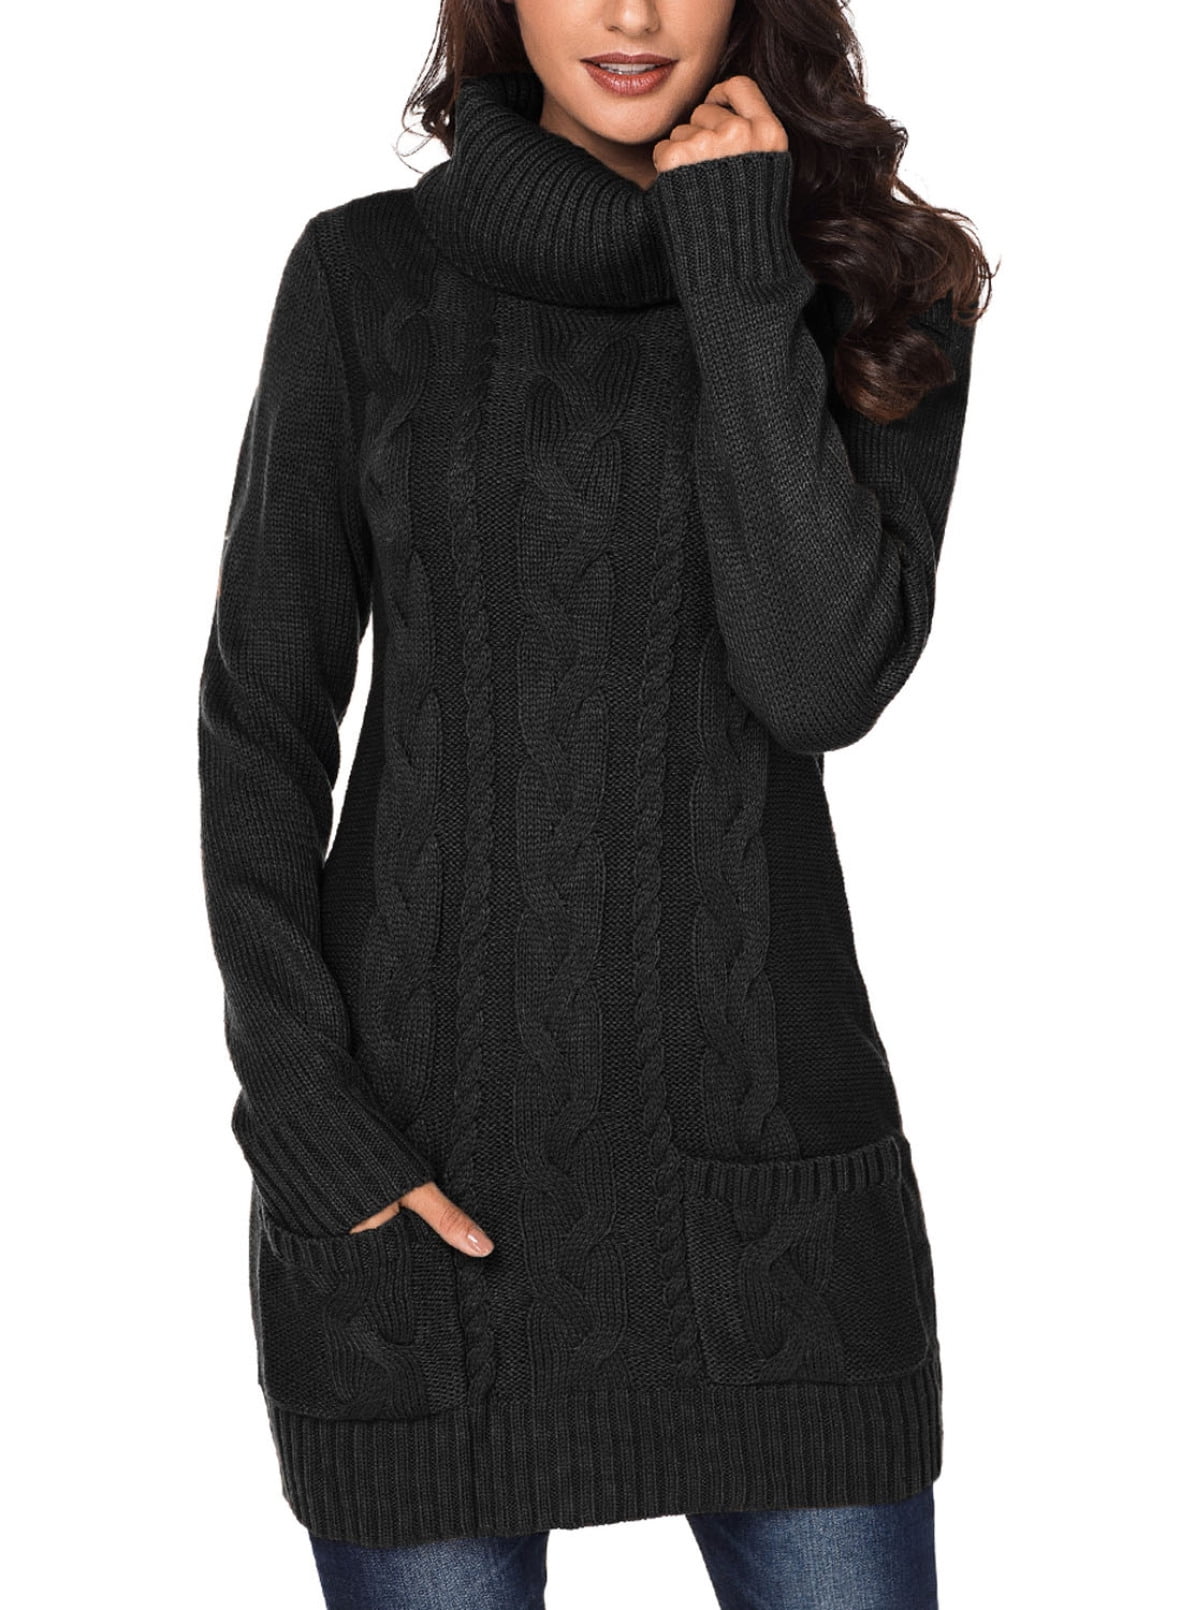 Women Ladies Cable Knitted Cowl Neck Belted Long Sleeve Jumper Dress Sweater Top 